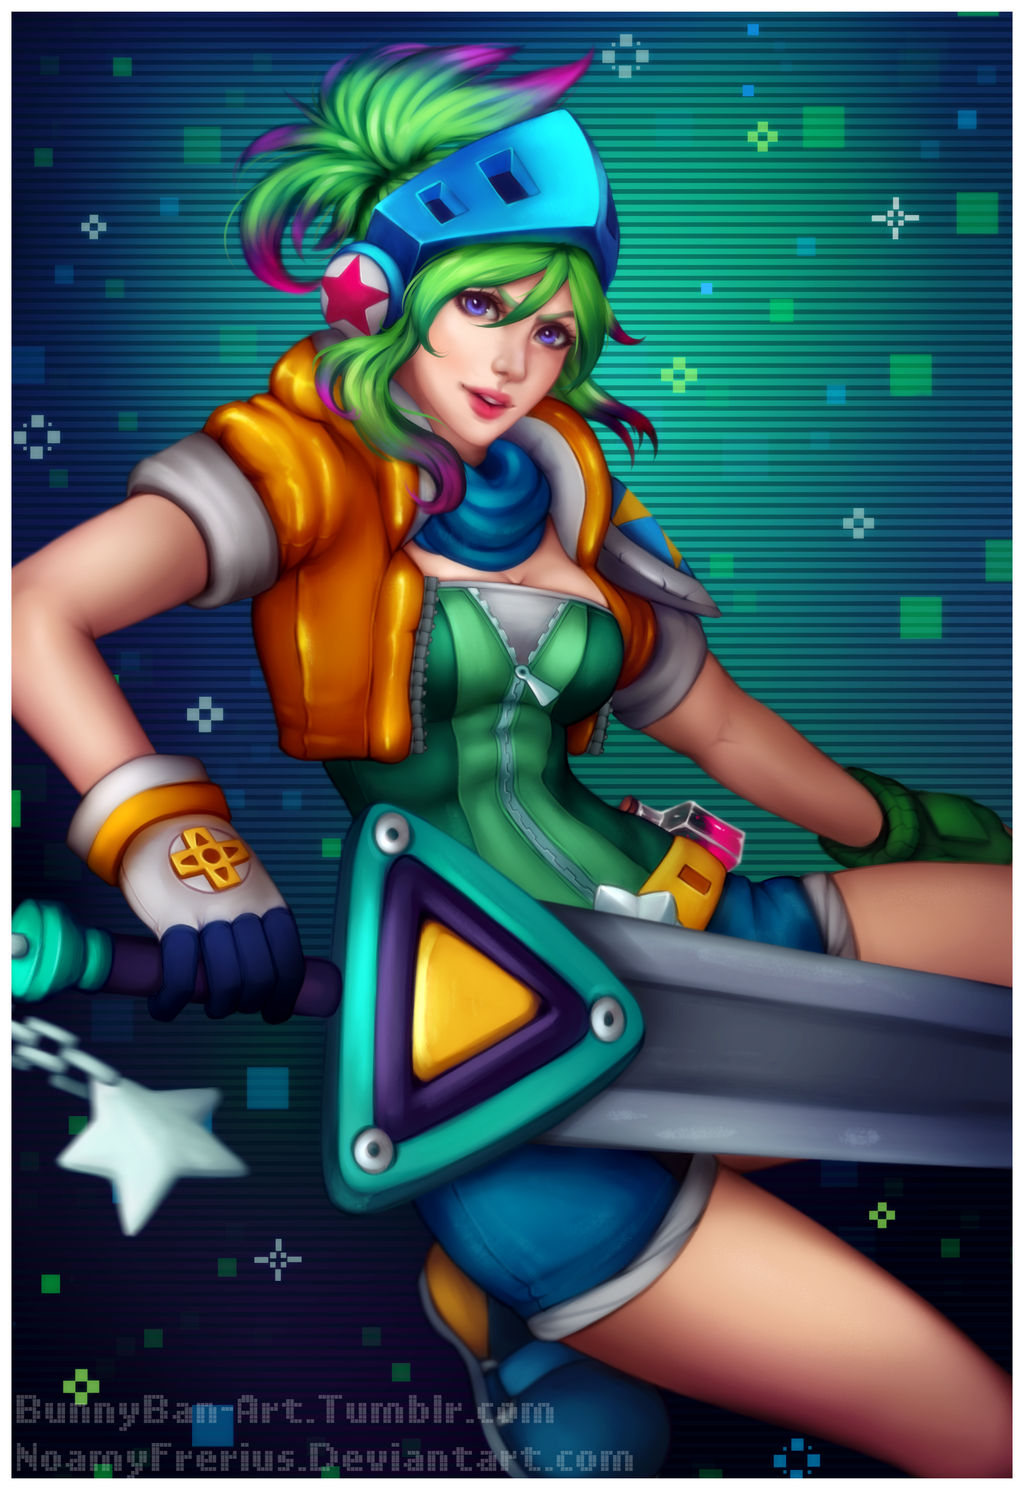 Arcade Riven: Game Over by Love-Lucia on DeviantArt